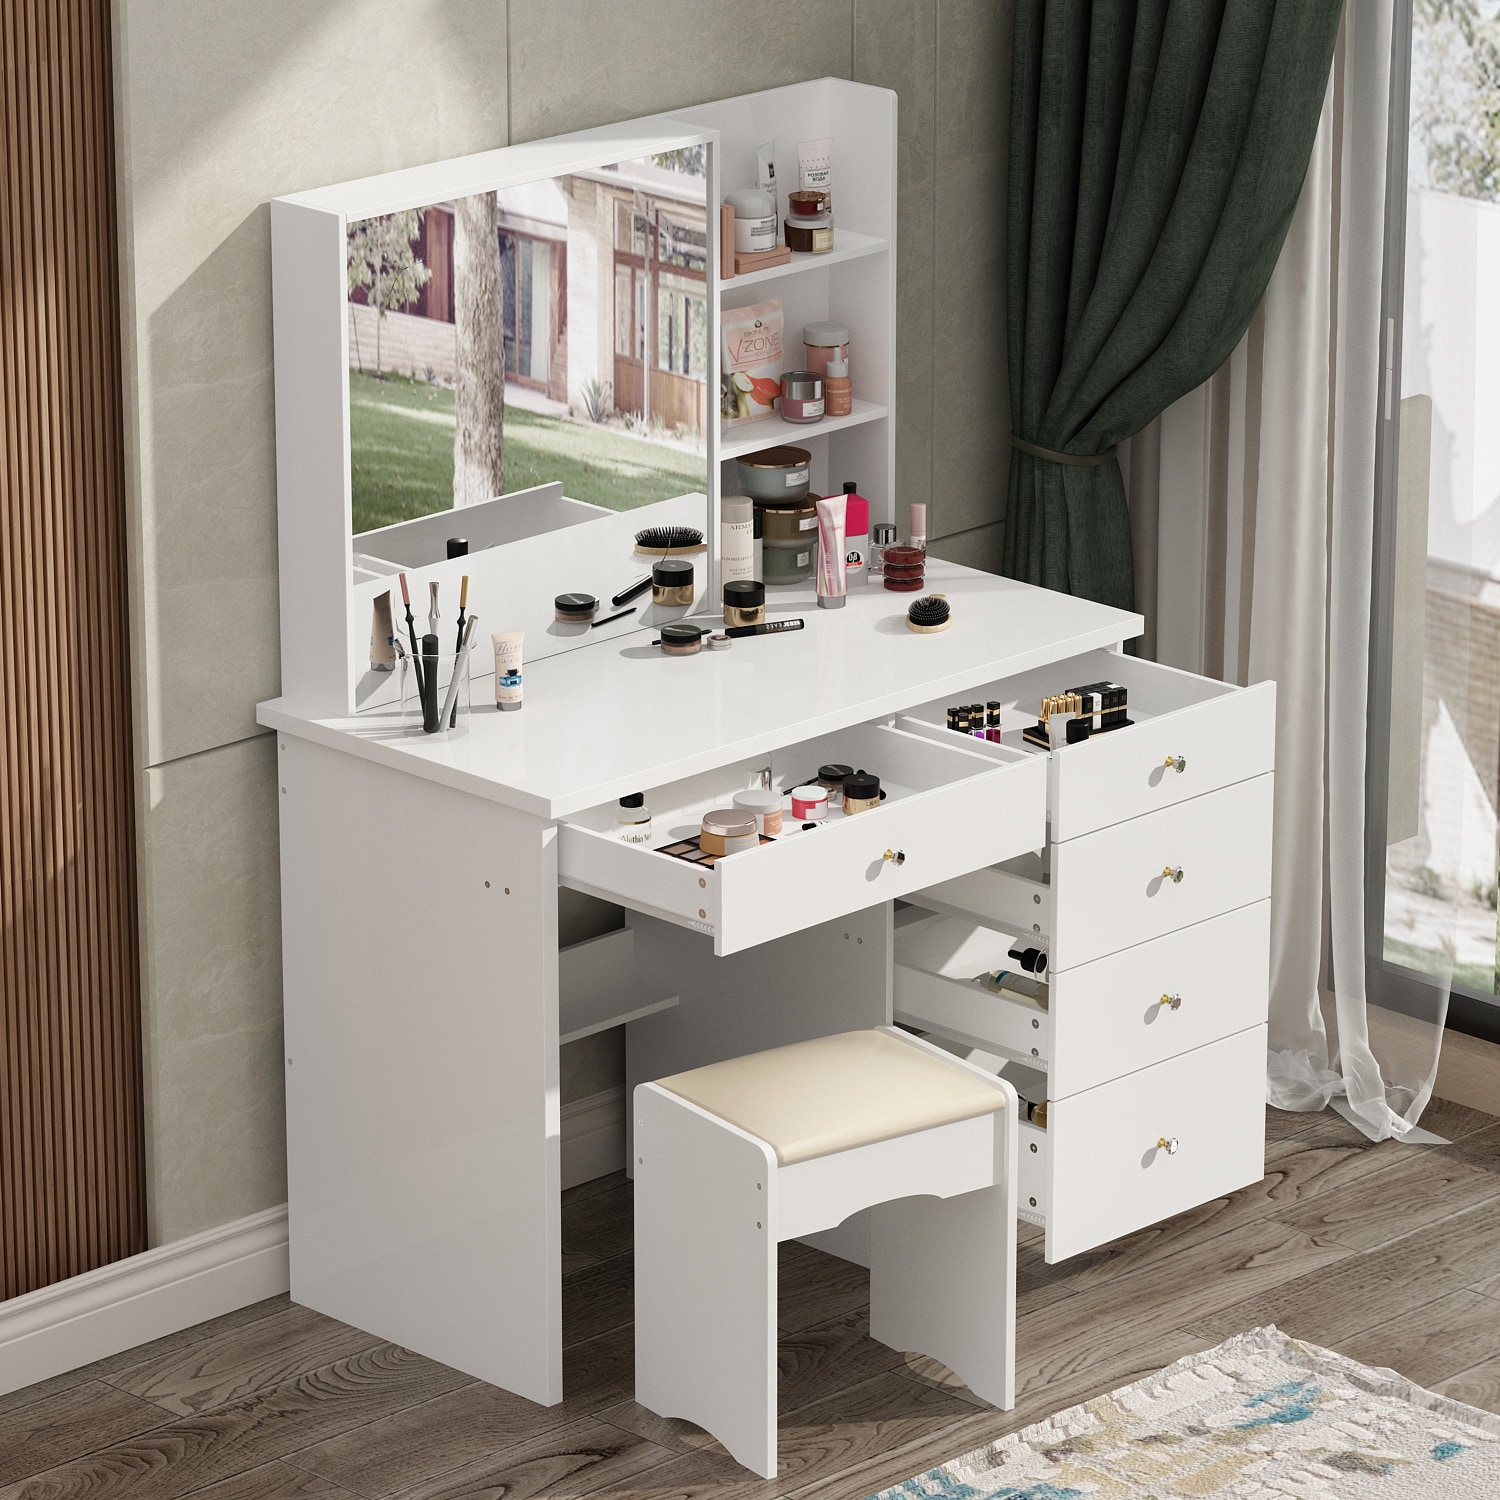 Get Ready in Style with a Luxe Make-up Vanity for Your Bedroom